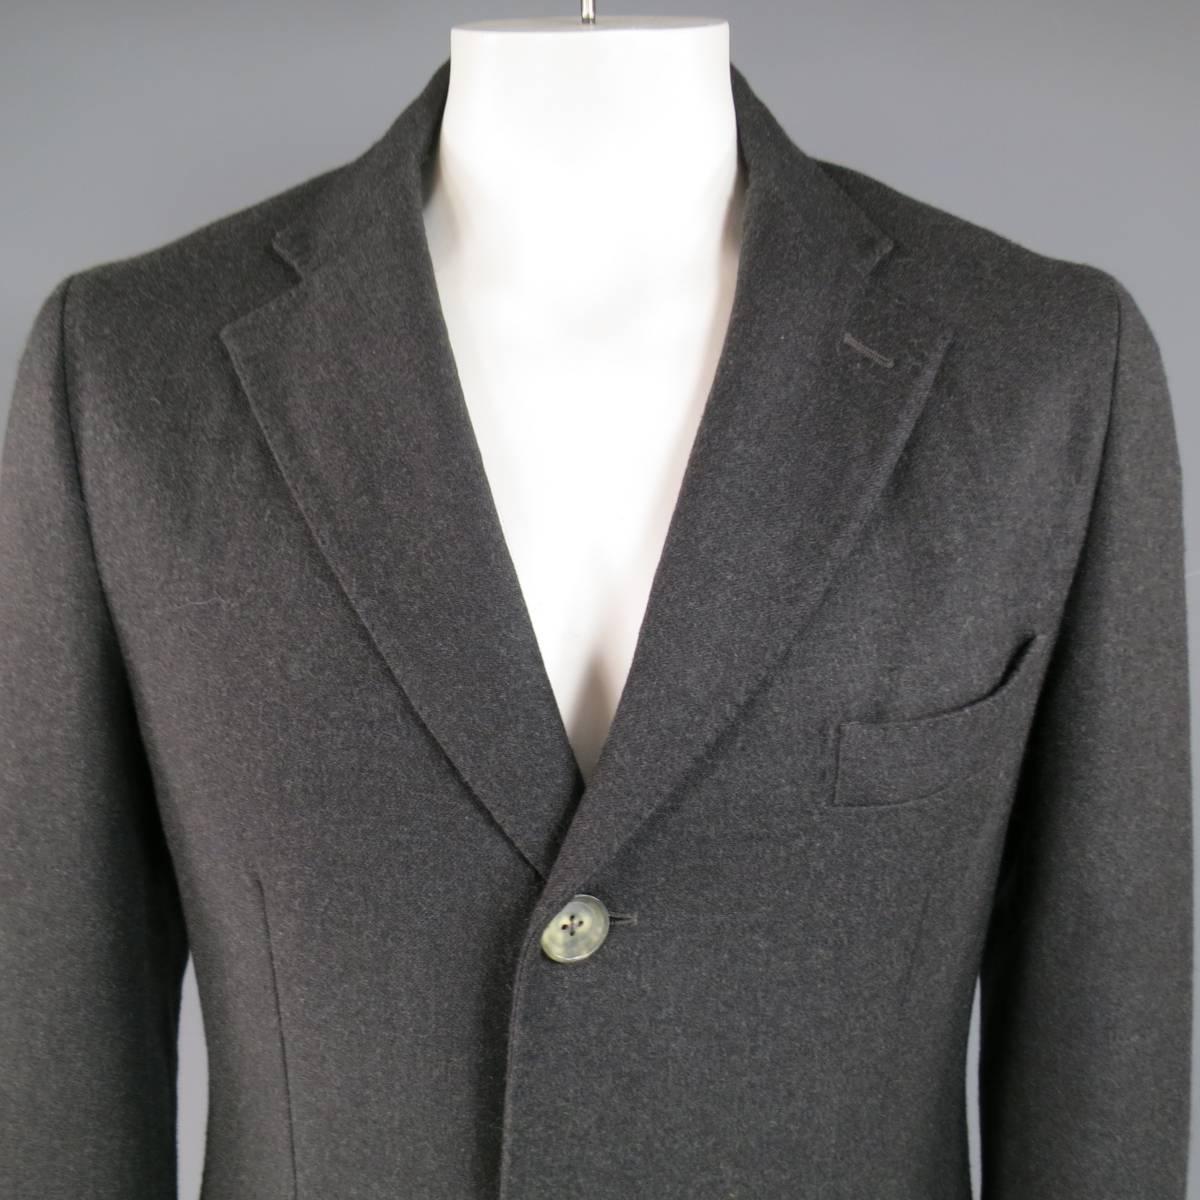 Classic ISAIA coat in a charcoal wool blend featuring a notch lapel with top stitching, light three button closure, double flap pockets, functional button cuff sleeves, and green interior. Made in Italy.
 
Excellent Pre-Owned Condition.
Marked: